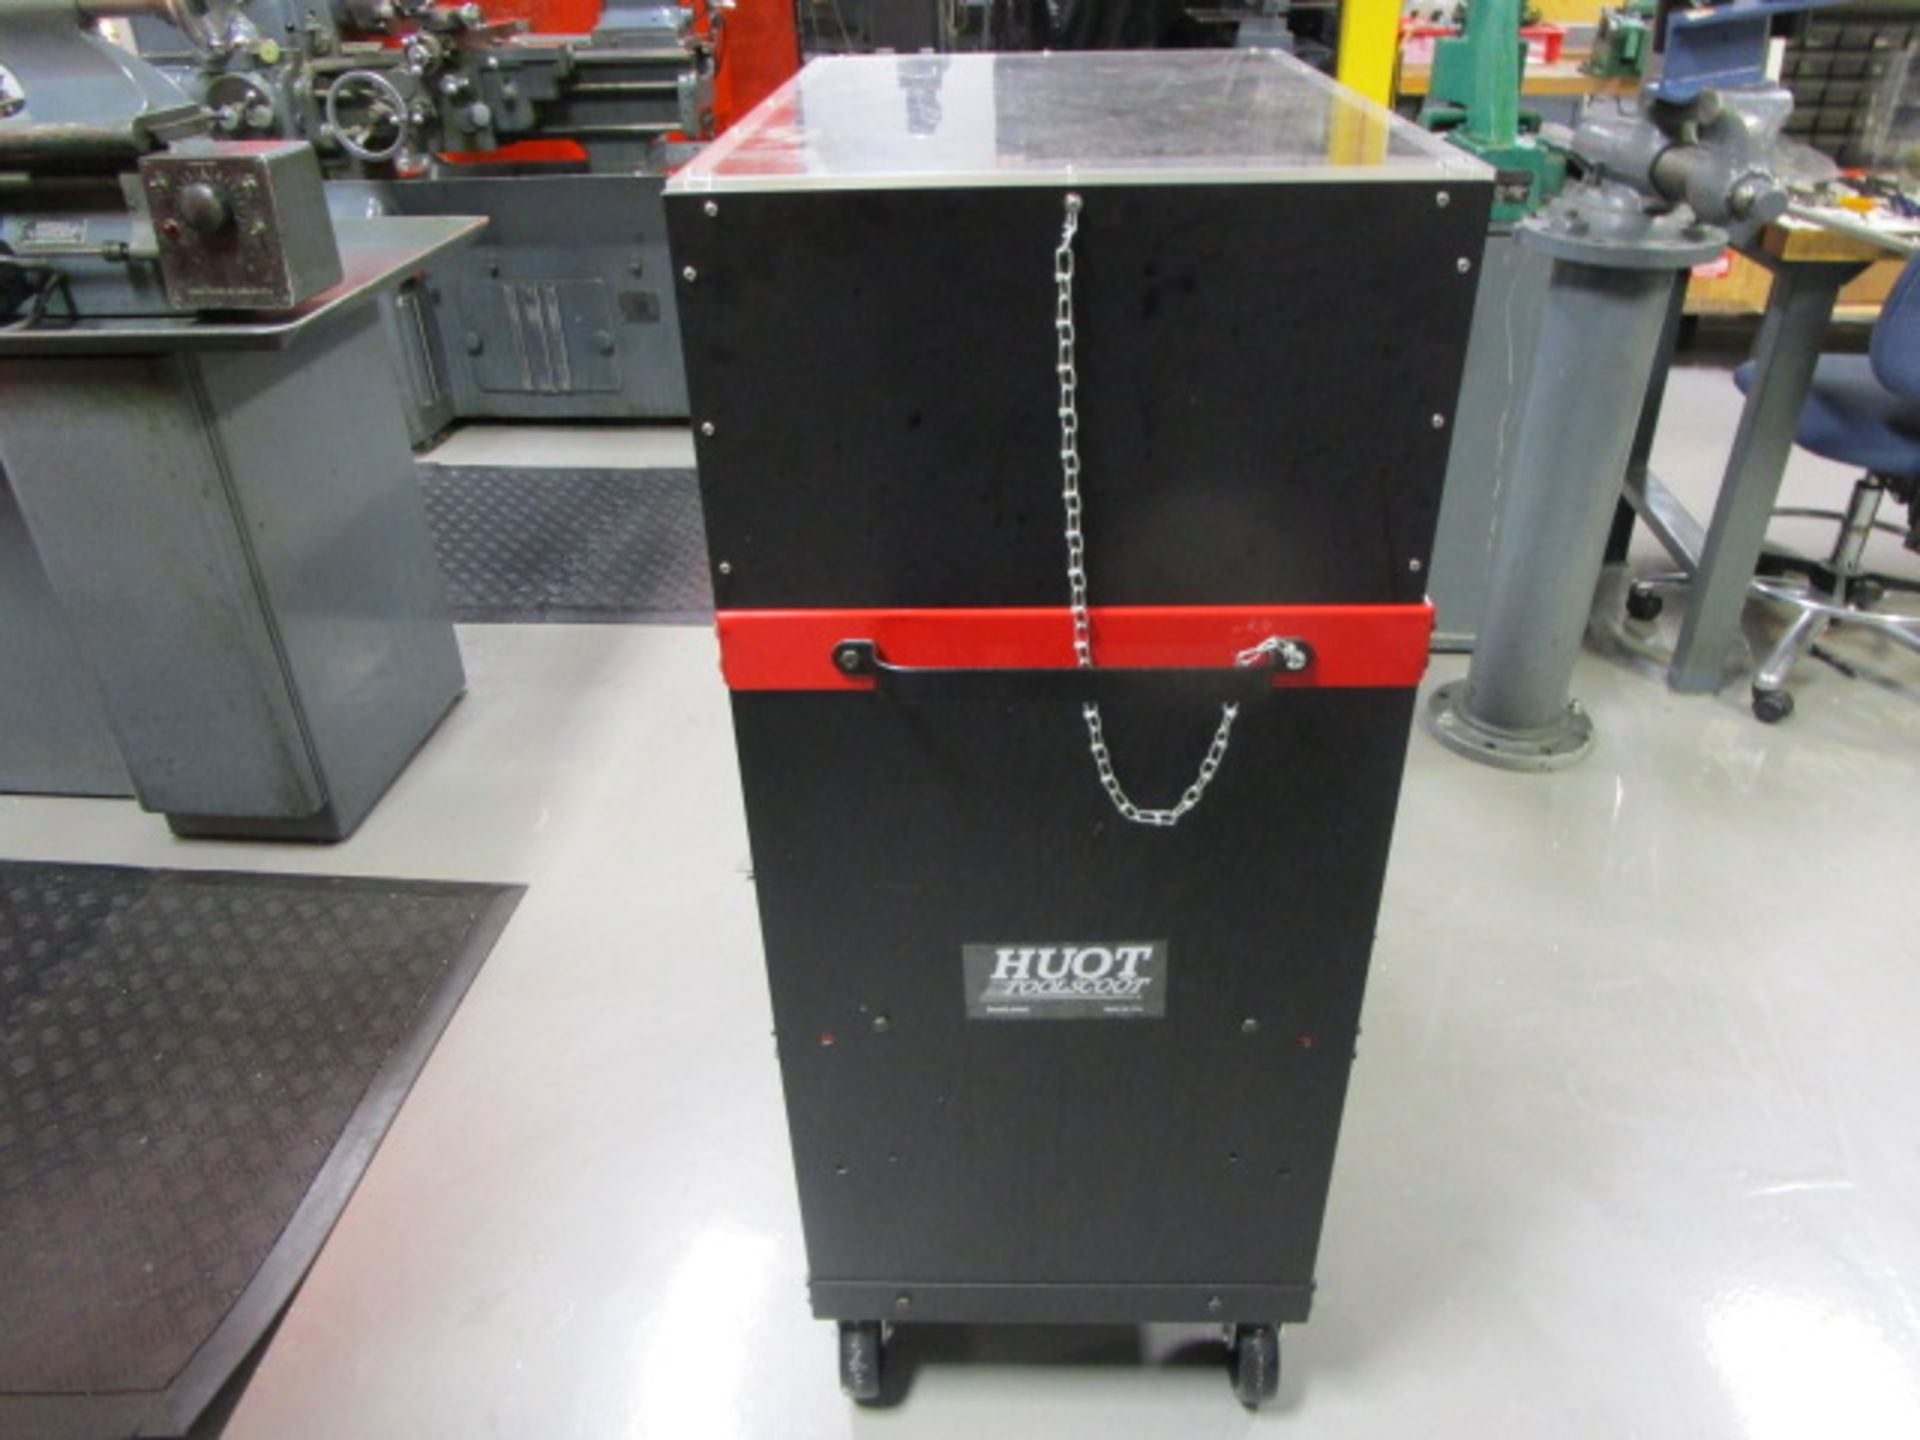 HUOT TOOL CART WITH TOOLING CONTENTS FOR SAMSUNG SMEC PVC 400 CNC MACHINING CENTER TOOLING - CONCORD - Image 4 of 10